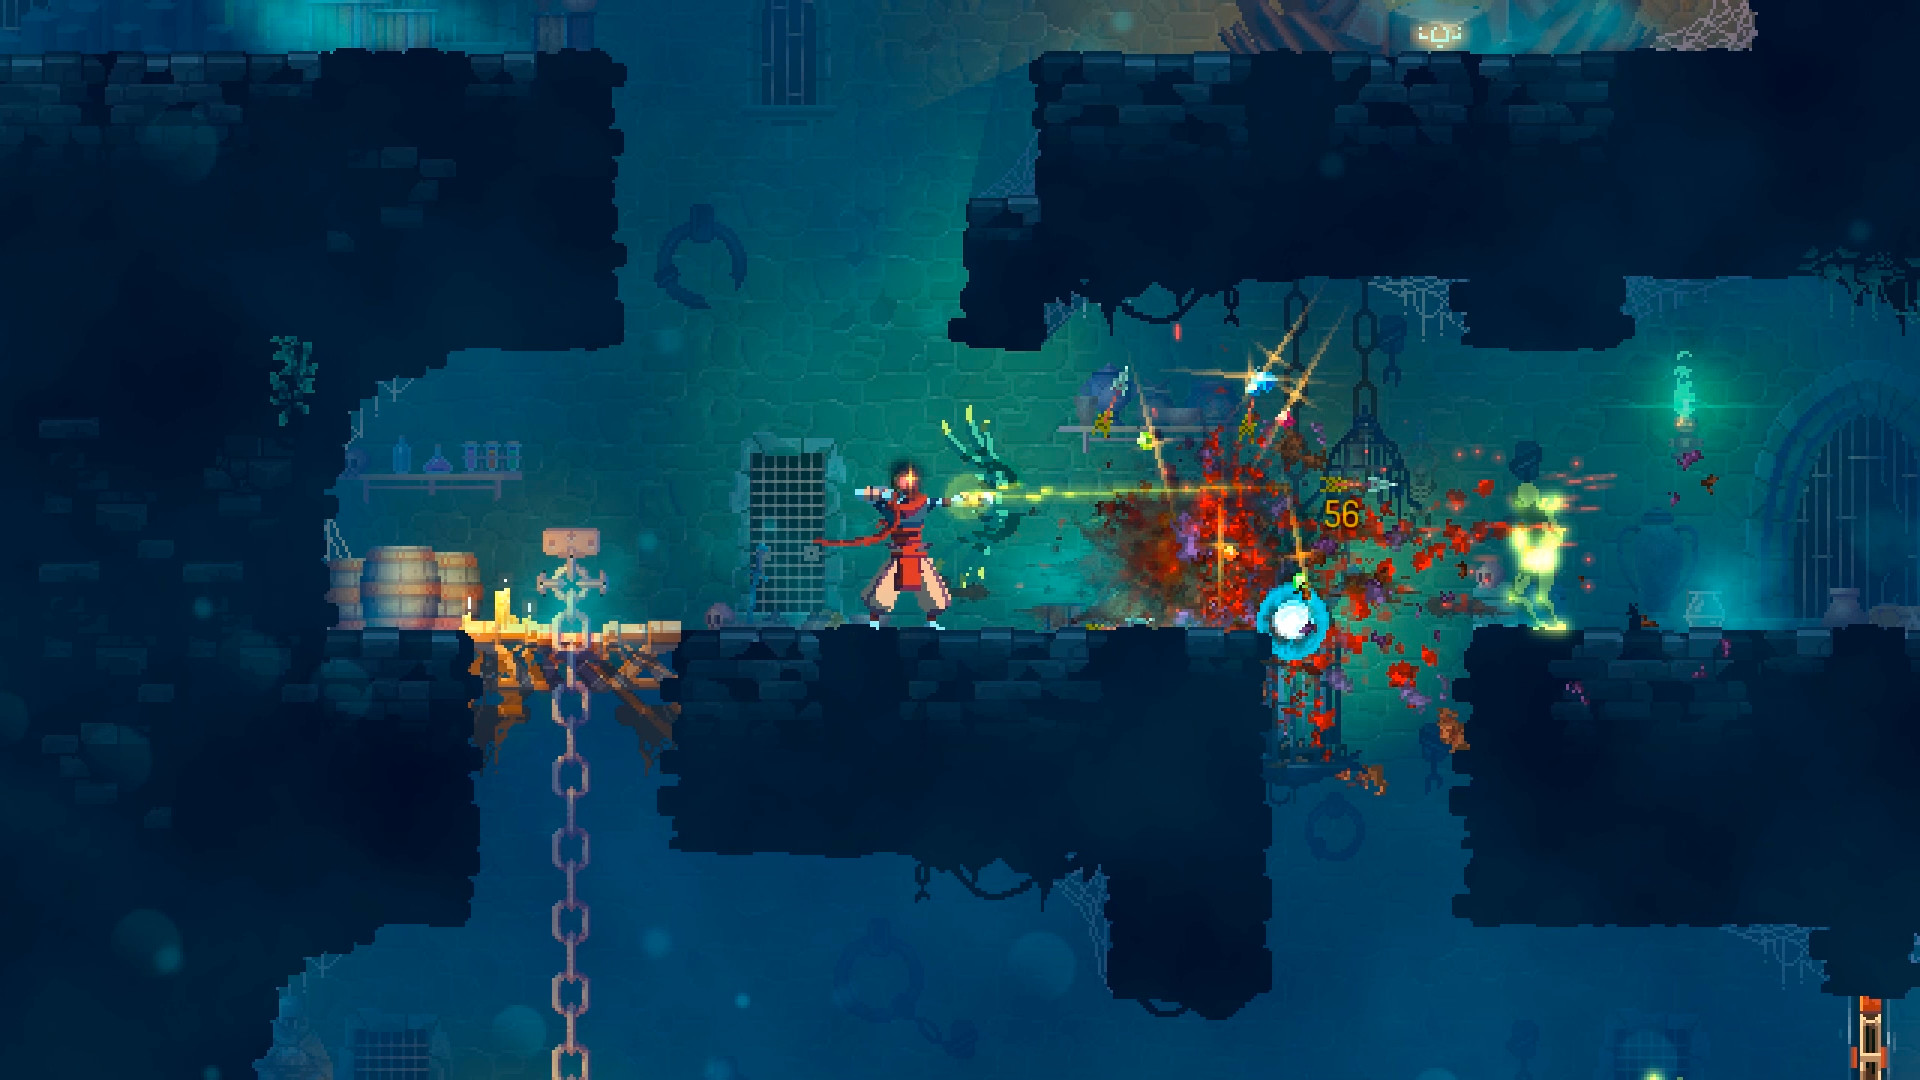 Dead Cells is adding new optional features to reduce ragequitting